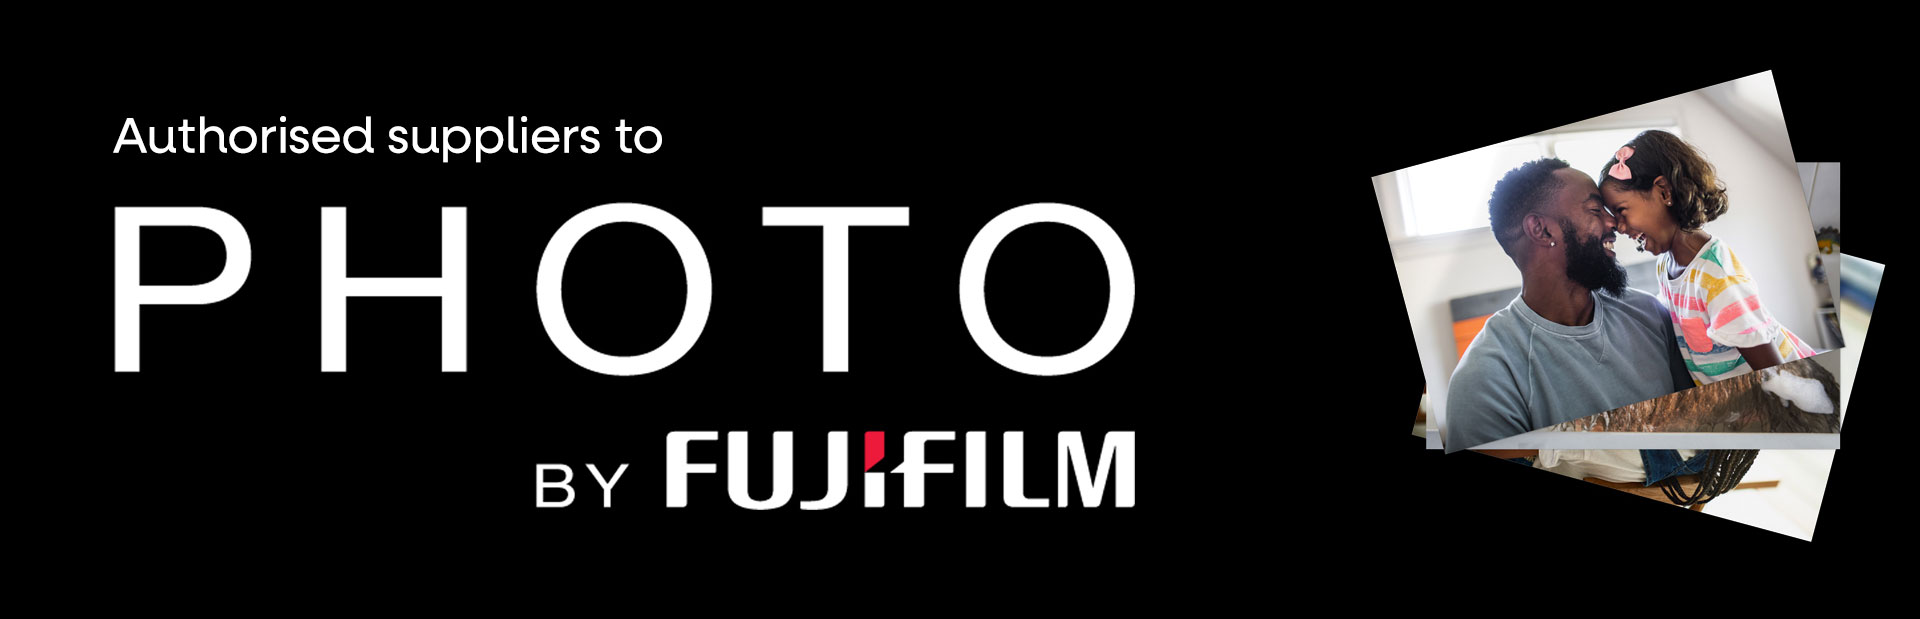 Authorised suppliers to Photo by Fujifilm